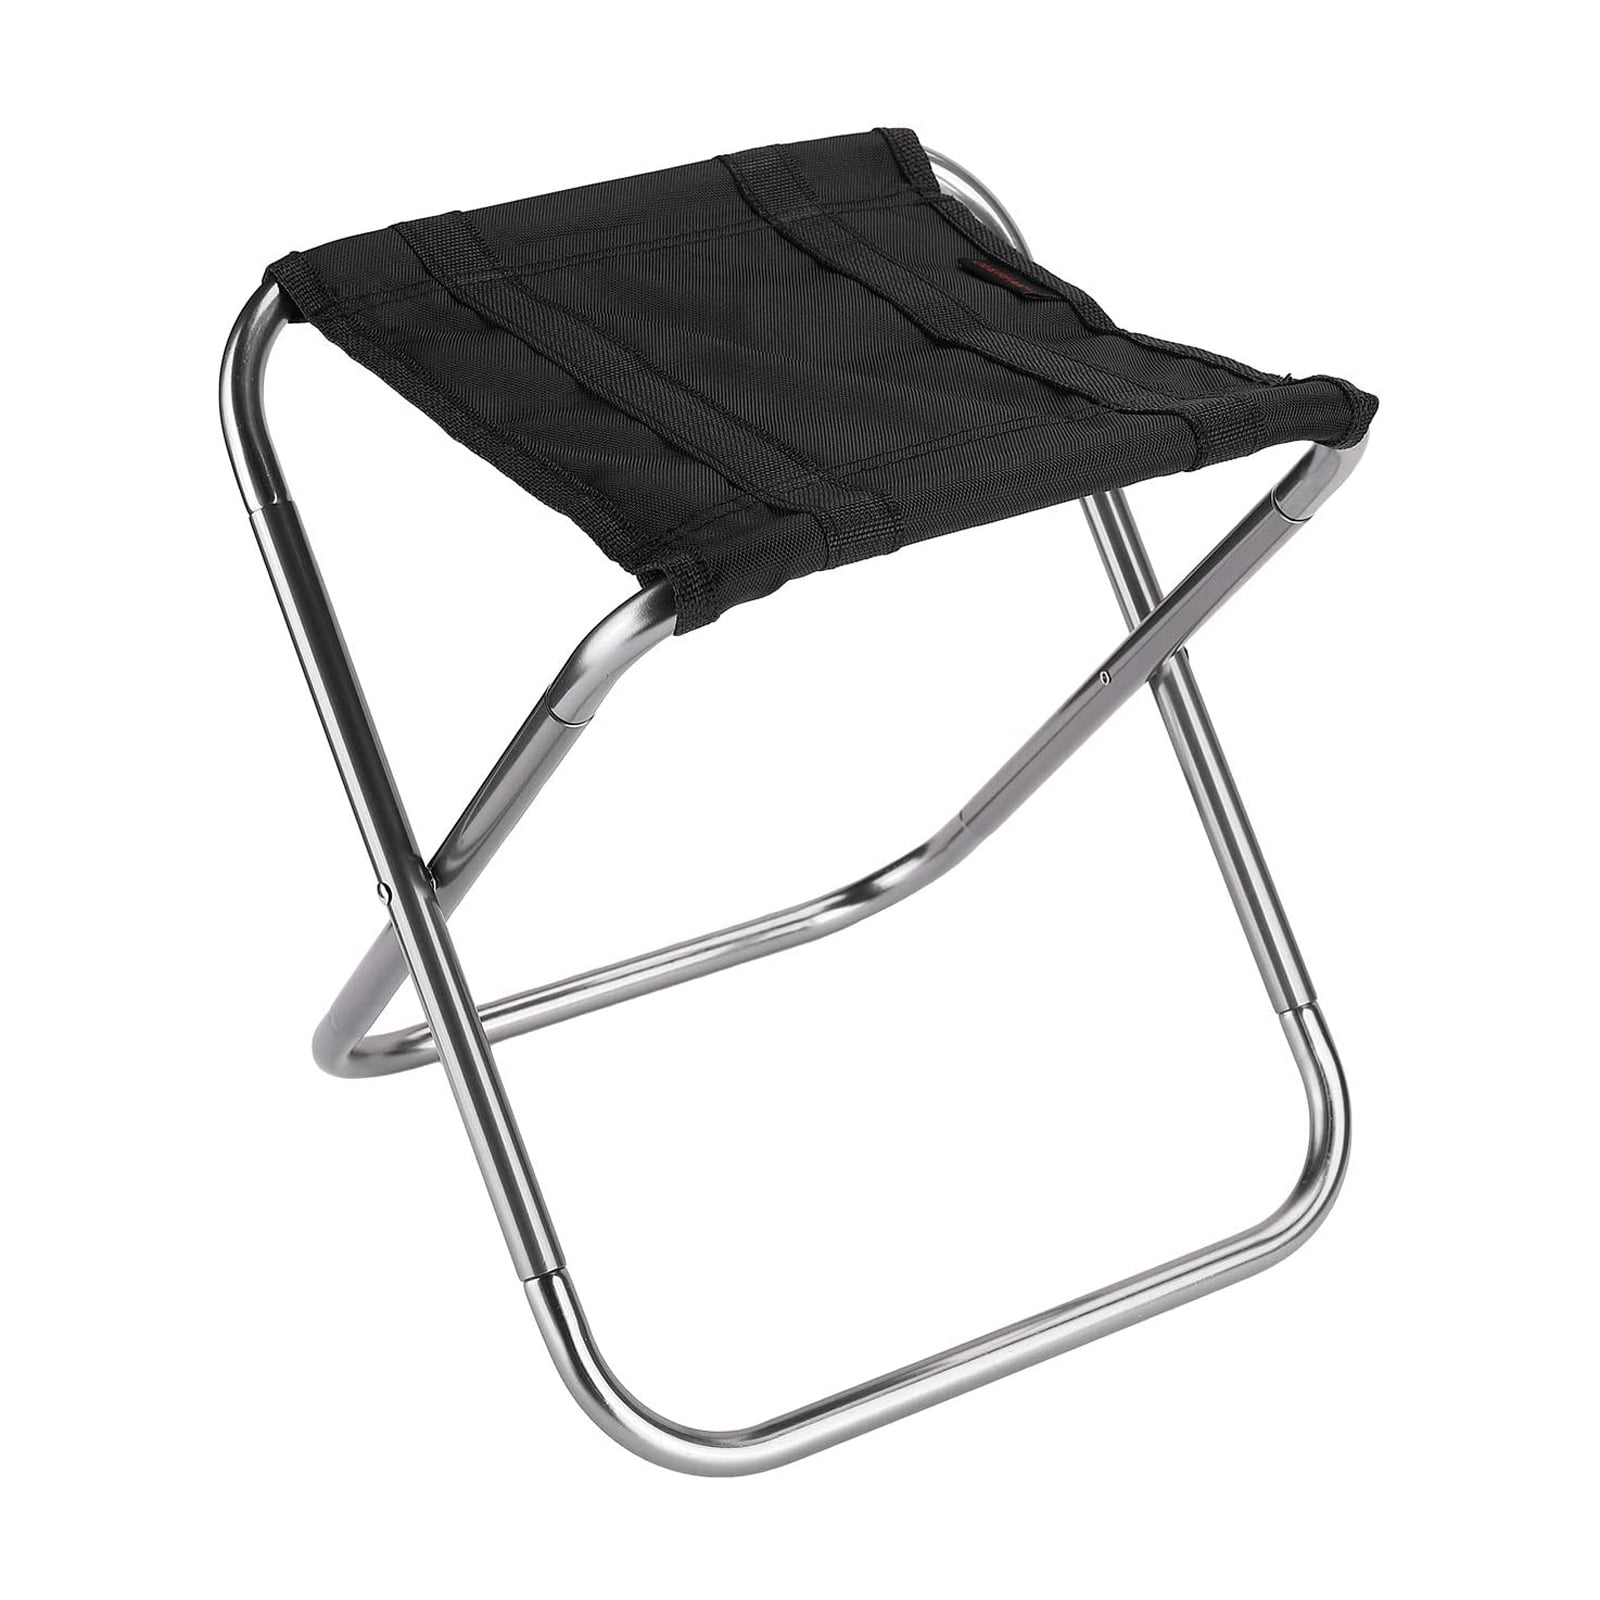 Details about   BEST Portable Outdoor Folding Stool Camping Fishing Seat HOT Small Chair E3C2